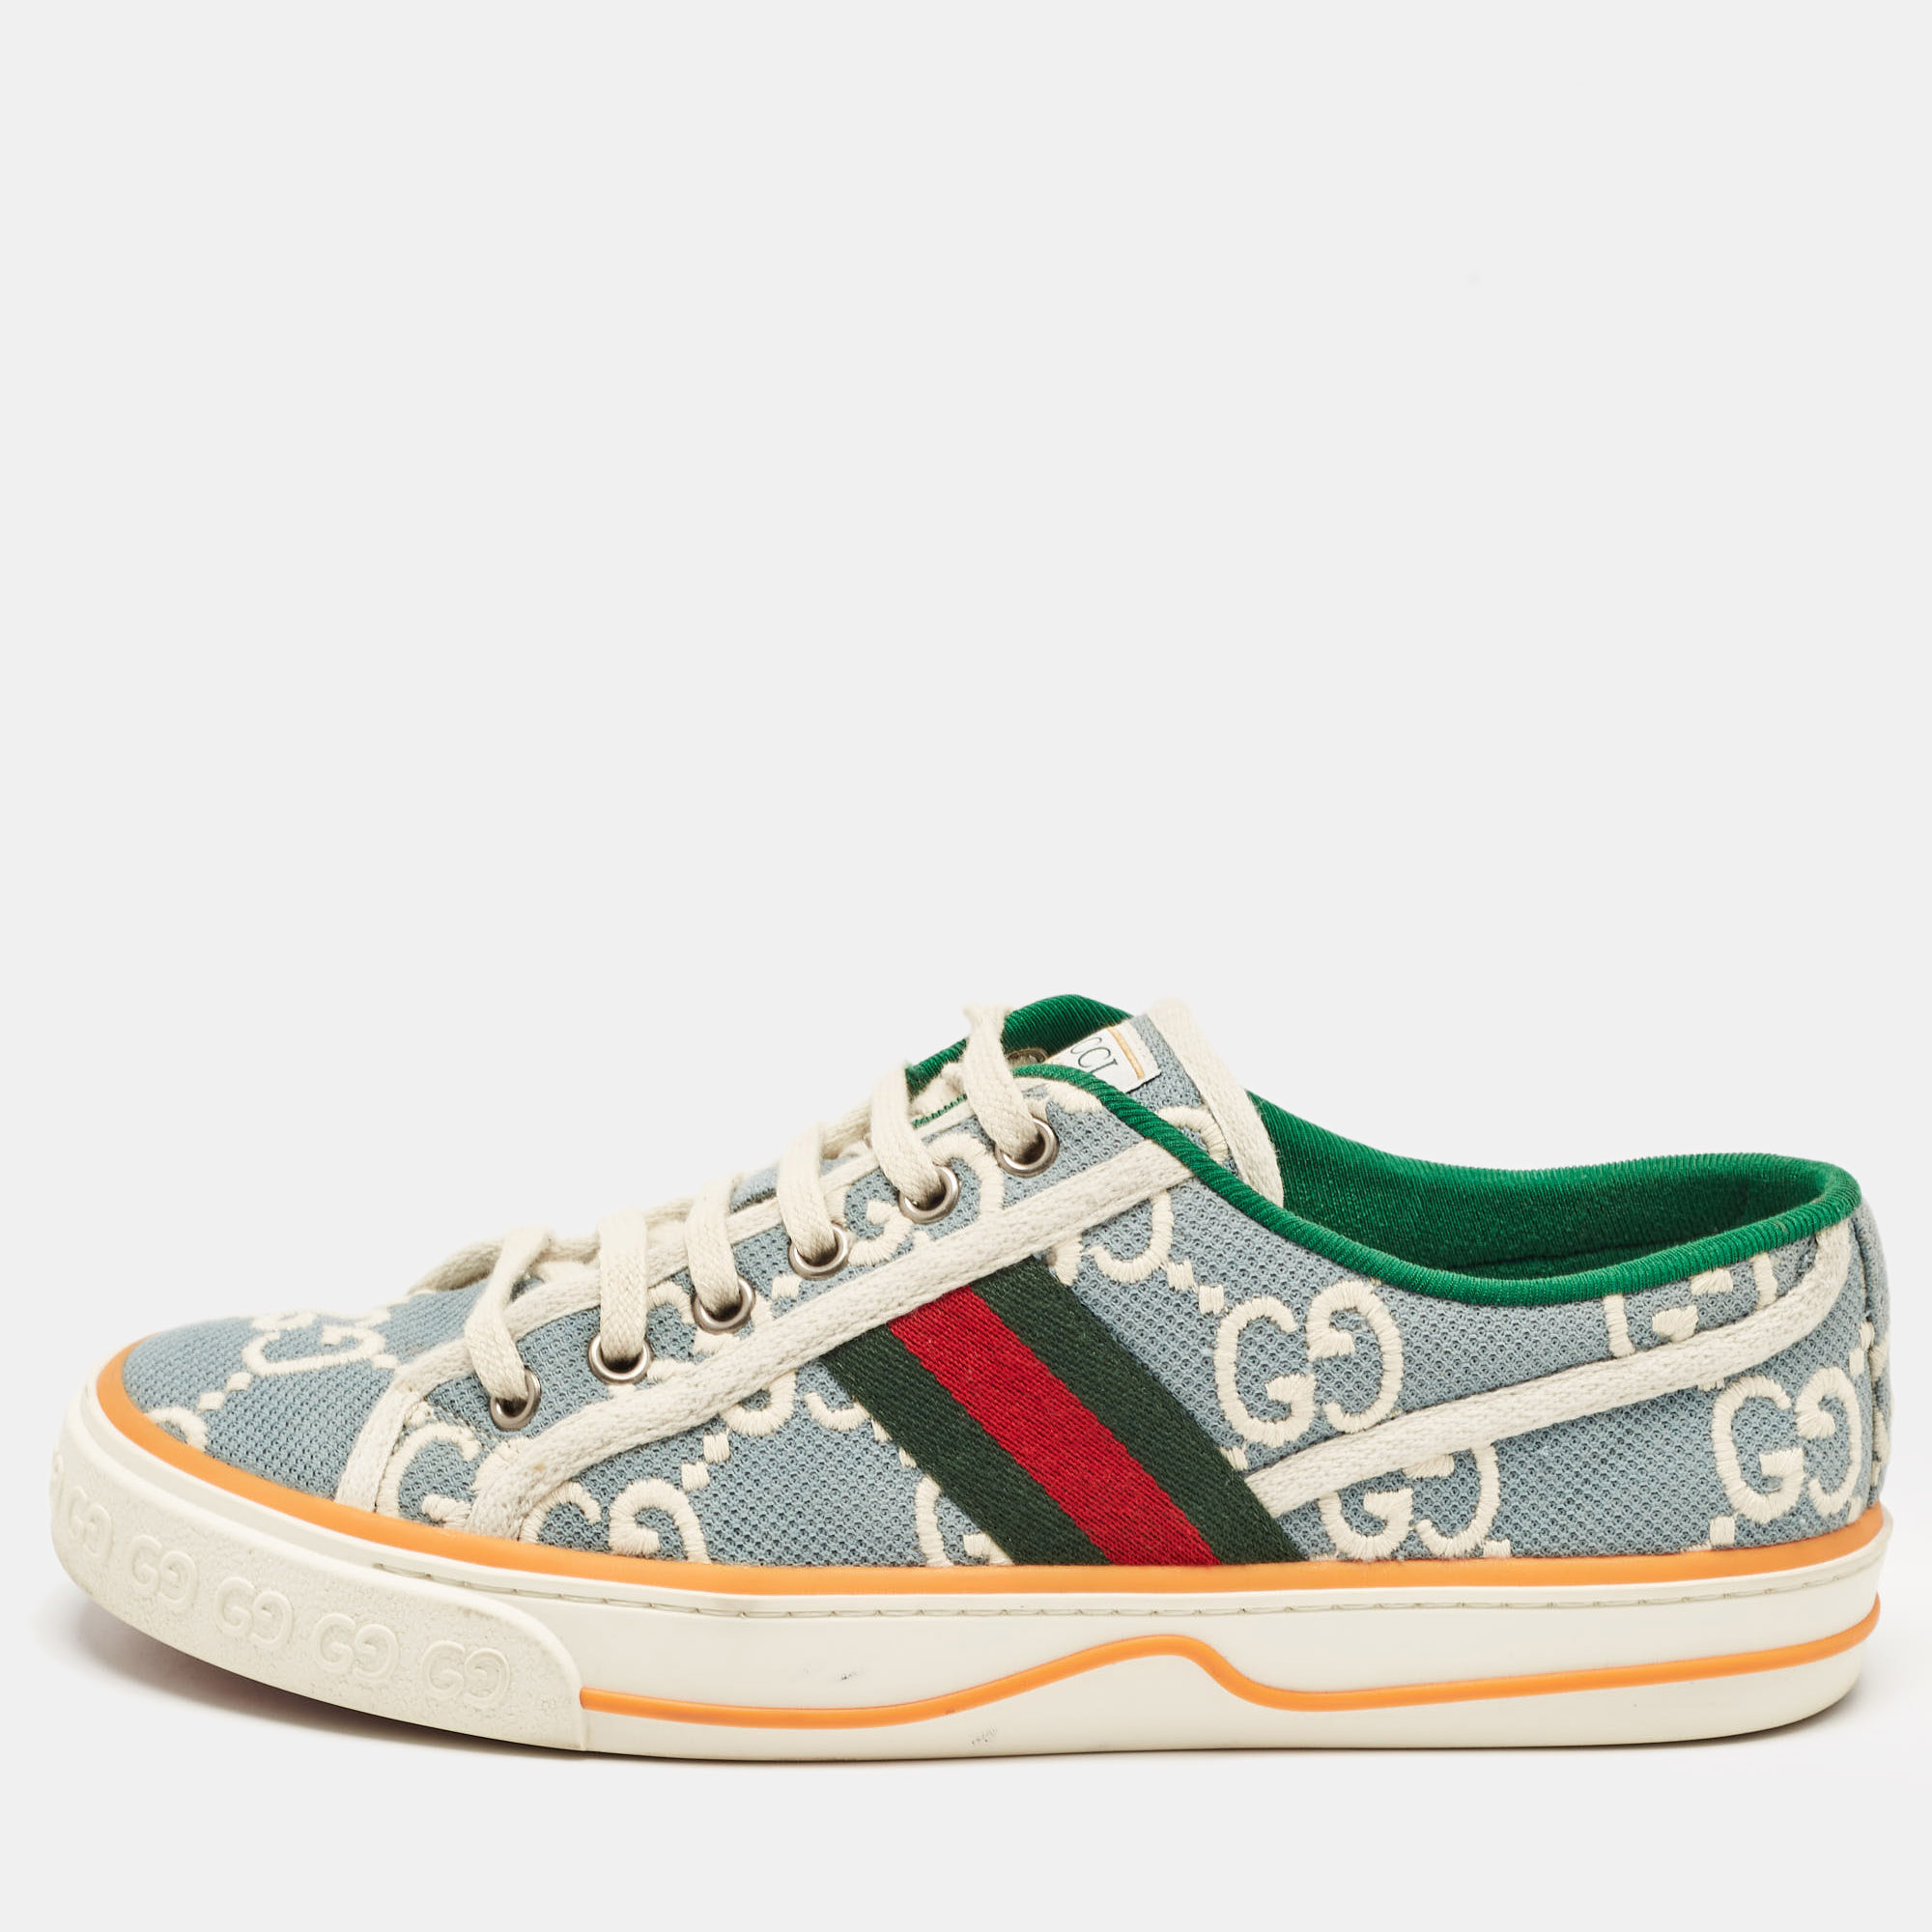 Gucci blue gg canvas tennis  low top sneakers size 39